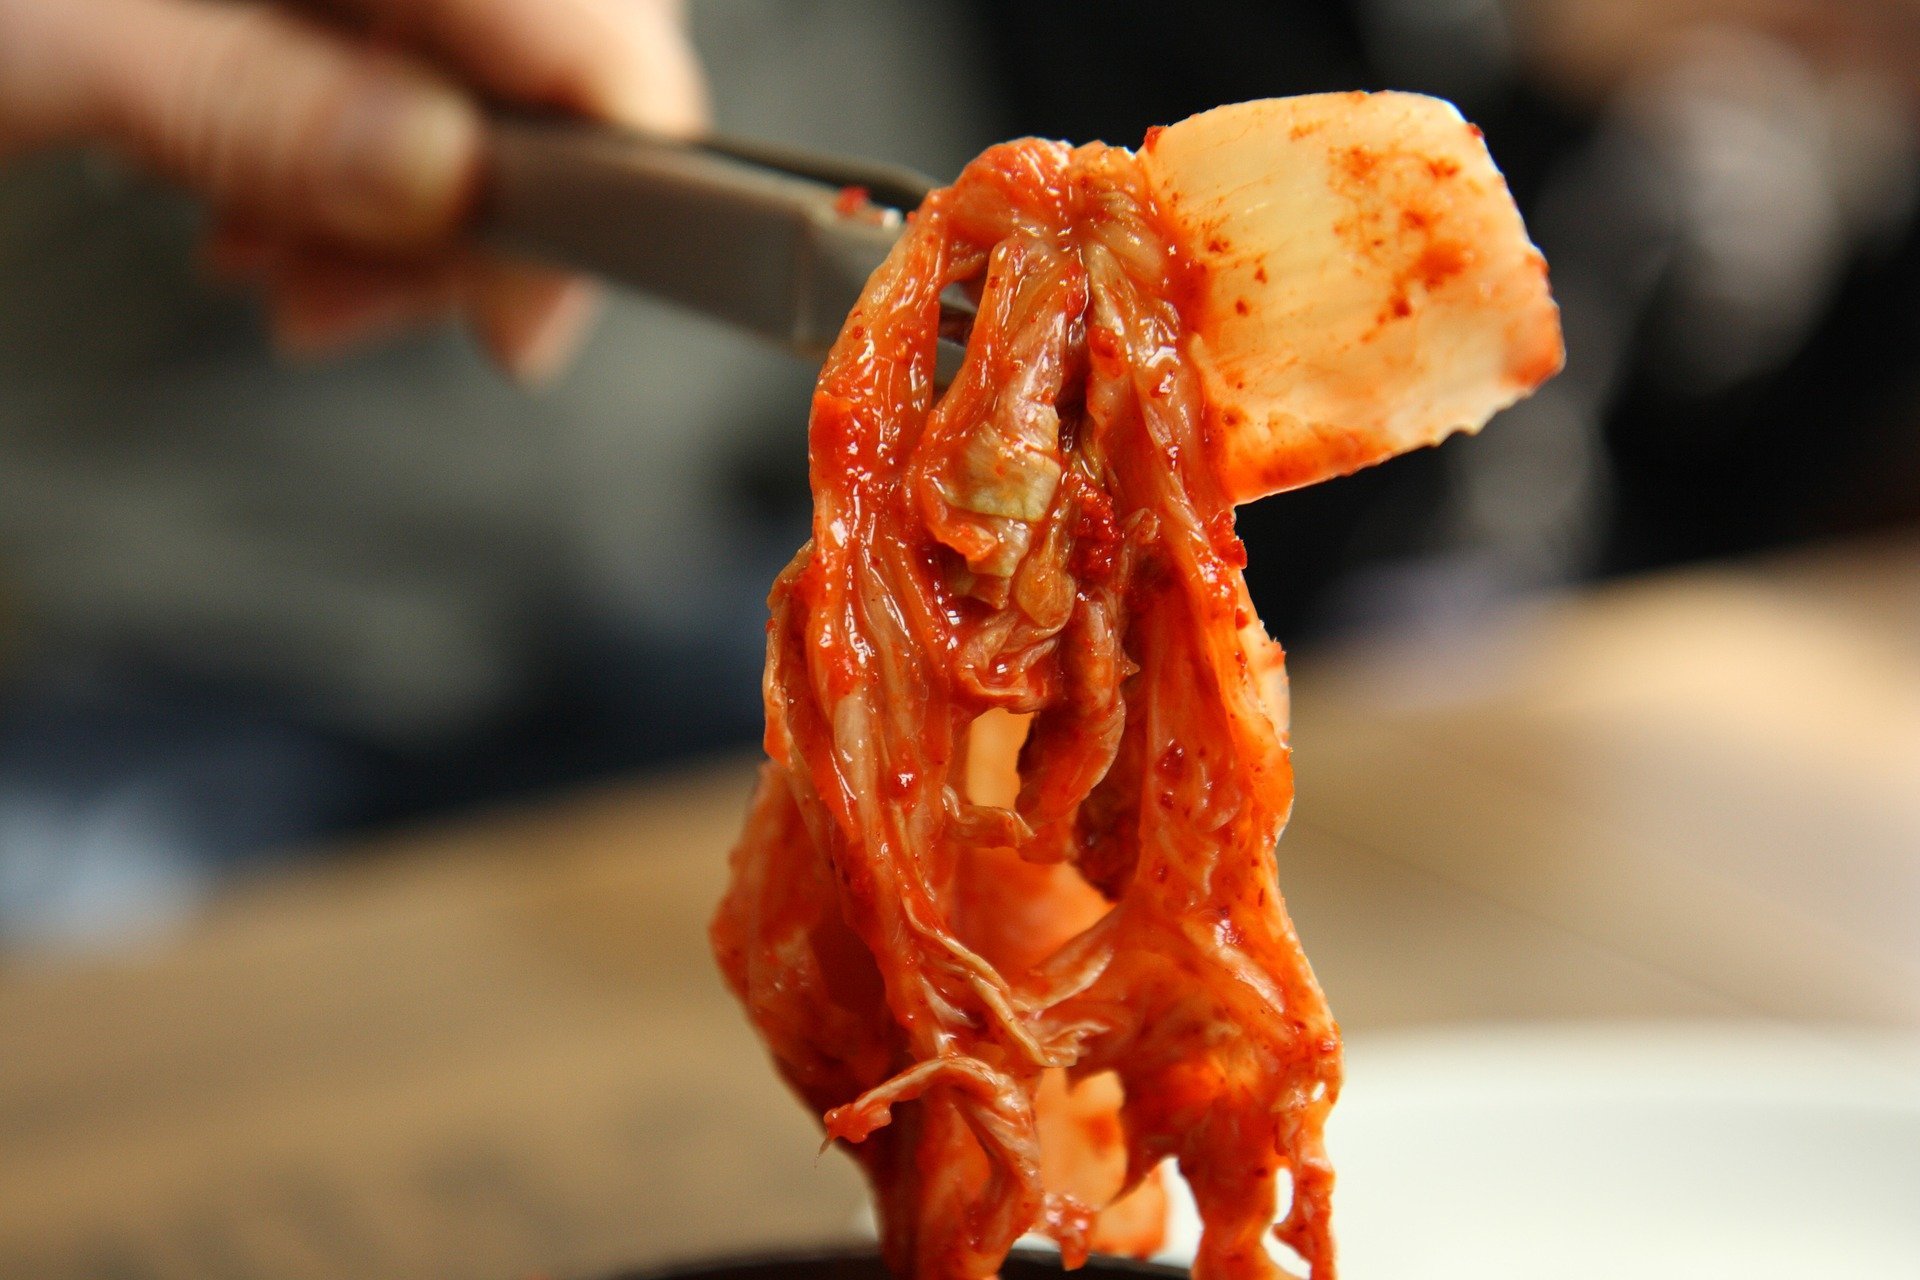 Try this at home: A quick-and-easy Korean kimchi recipe